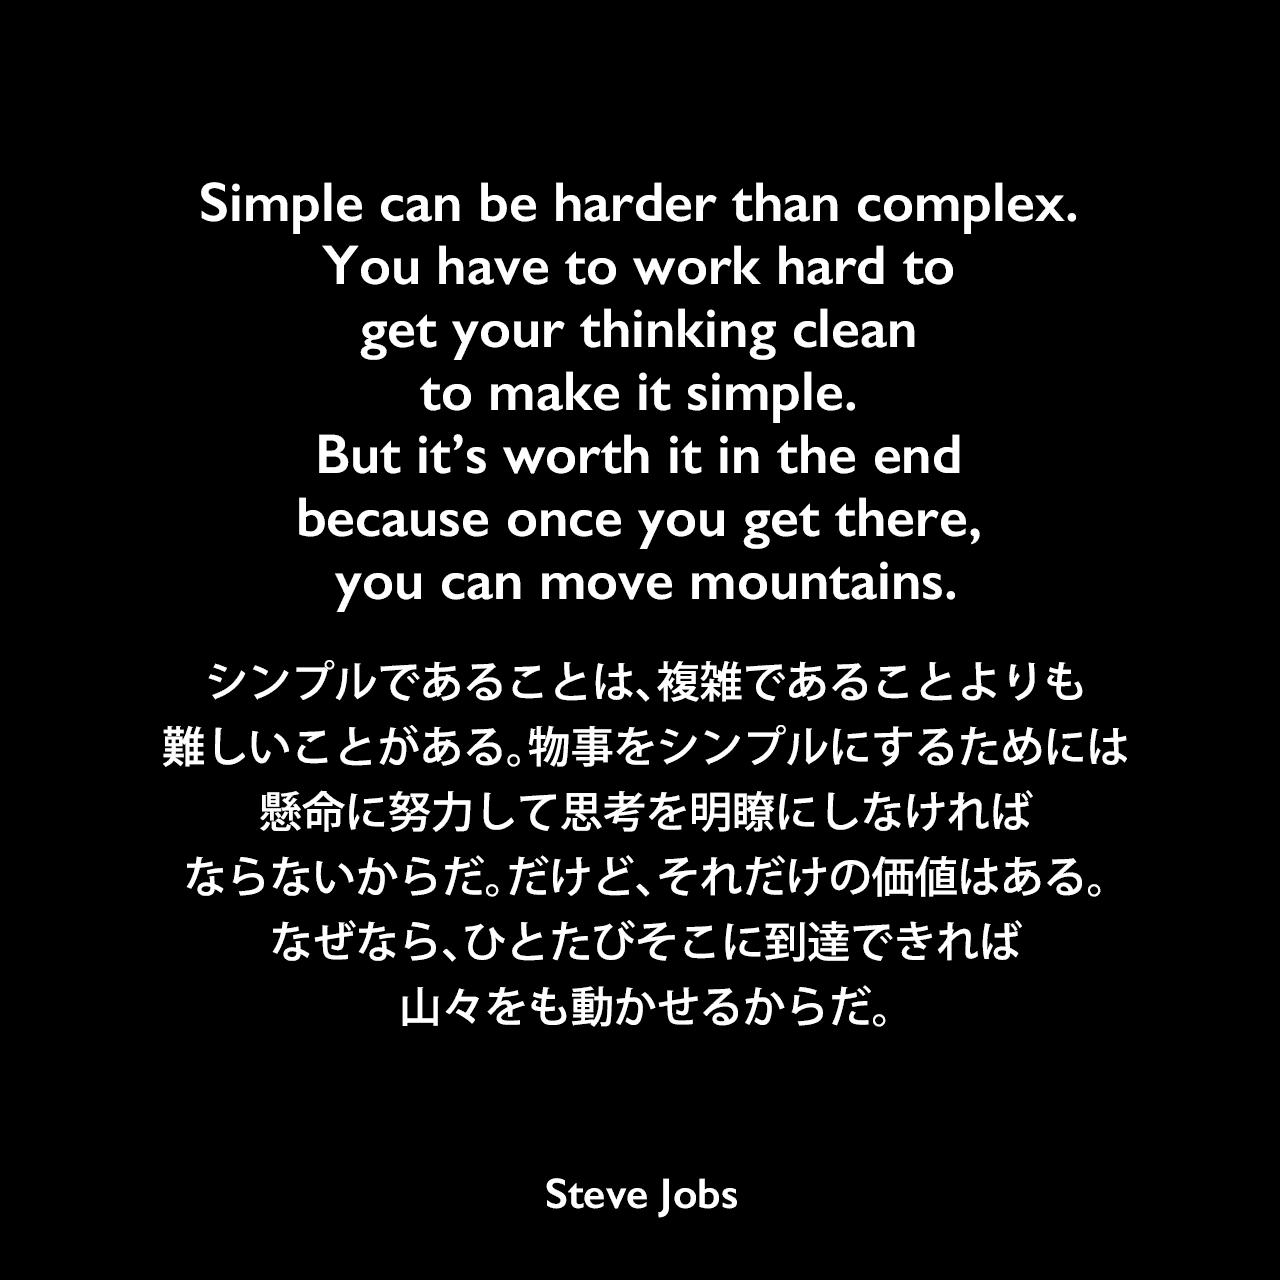 Simple can be harder than complex. You have to work hard to get your thinking clean to make it simple. But it’s worth it in the end because once you get there, you can move mountains.シンプルであることは、複雑であることよりも難しいことがある。物事をシンプルにするためには、懸命に努力して思考を明瞭にしなければならないからだ。だけど、それだけの価値はある。なぜなら、ひとたびそこに到達できれば、山々をも動かせるからだ。Steve Jobs